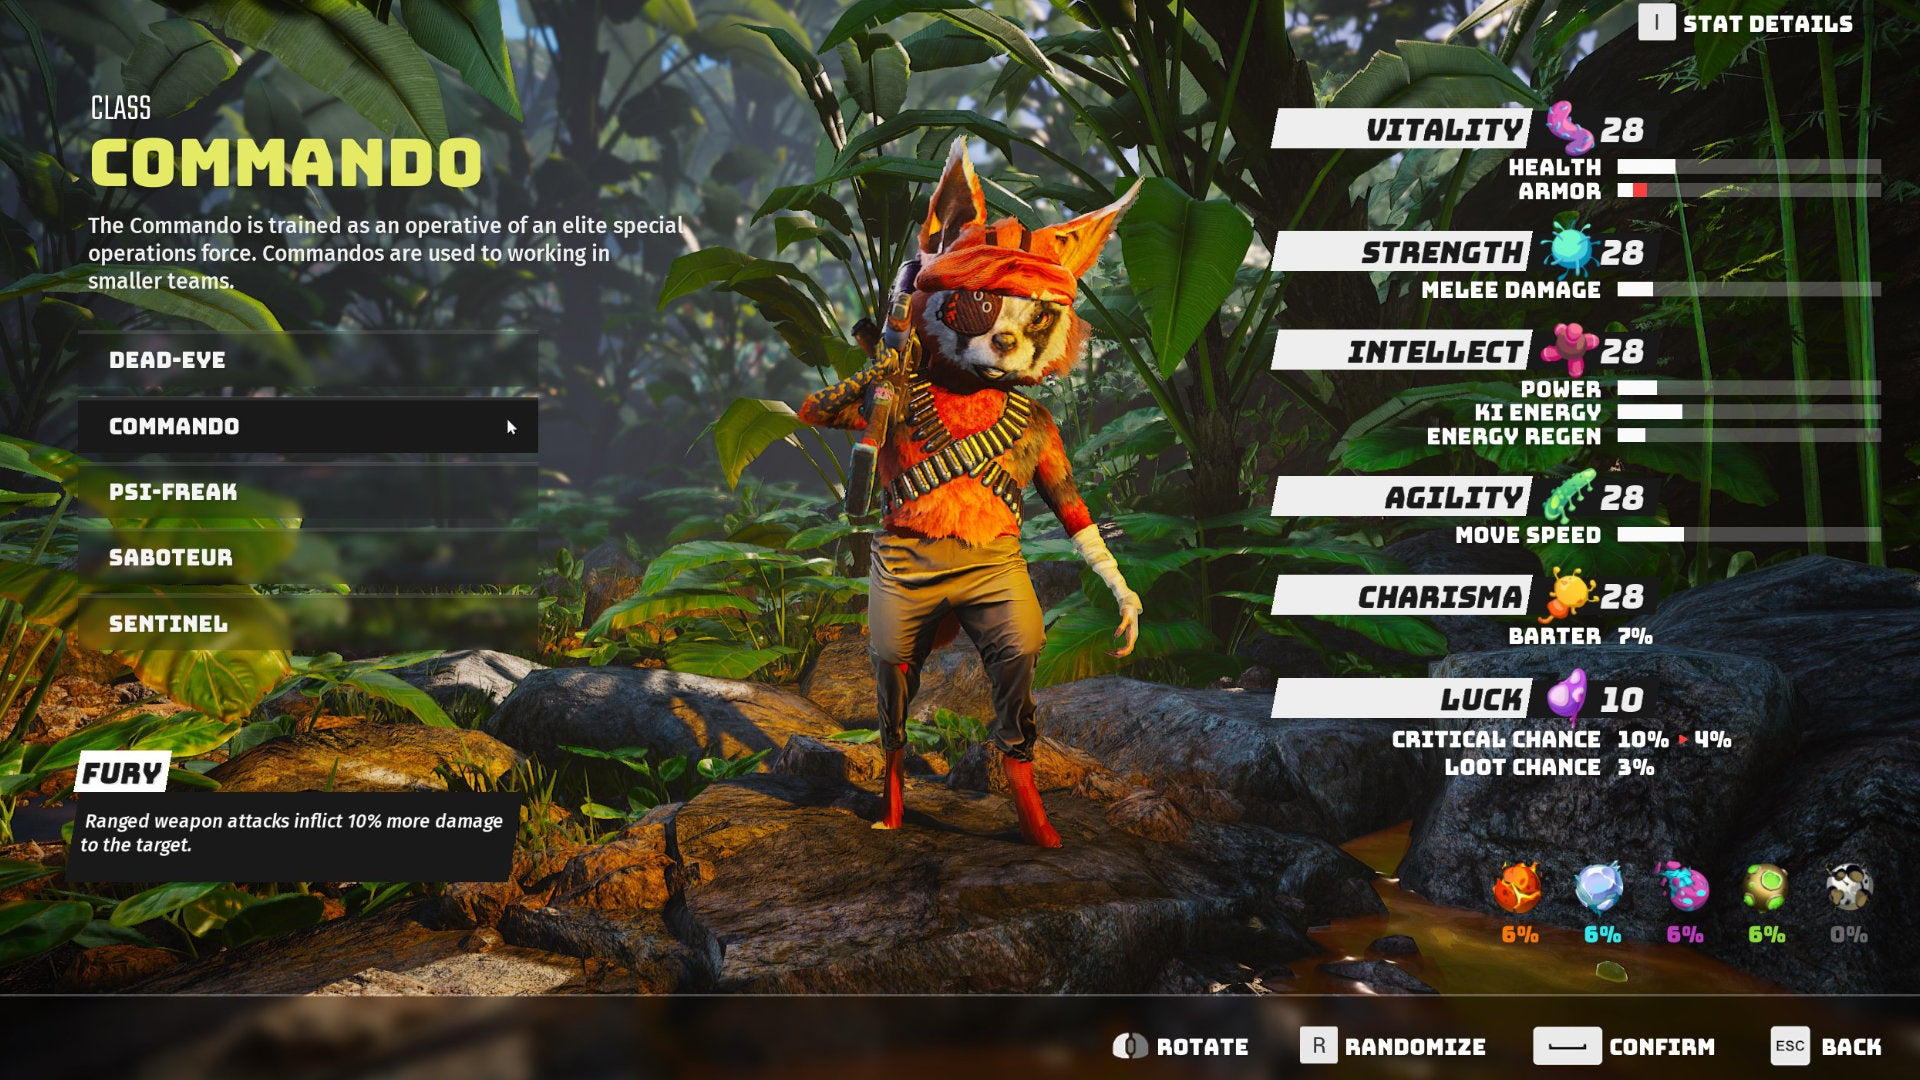 A Biomutant screenshot of the character creation and class selection screen, with the Commando class selected.